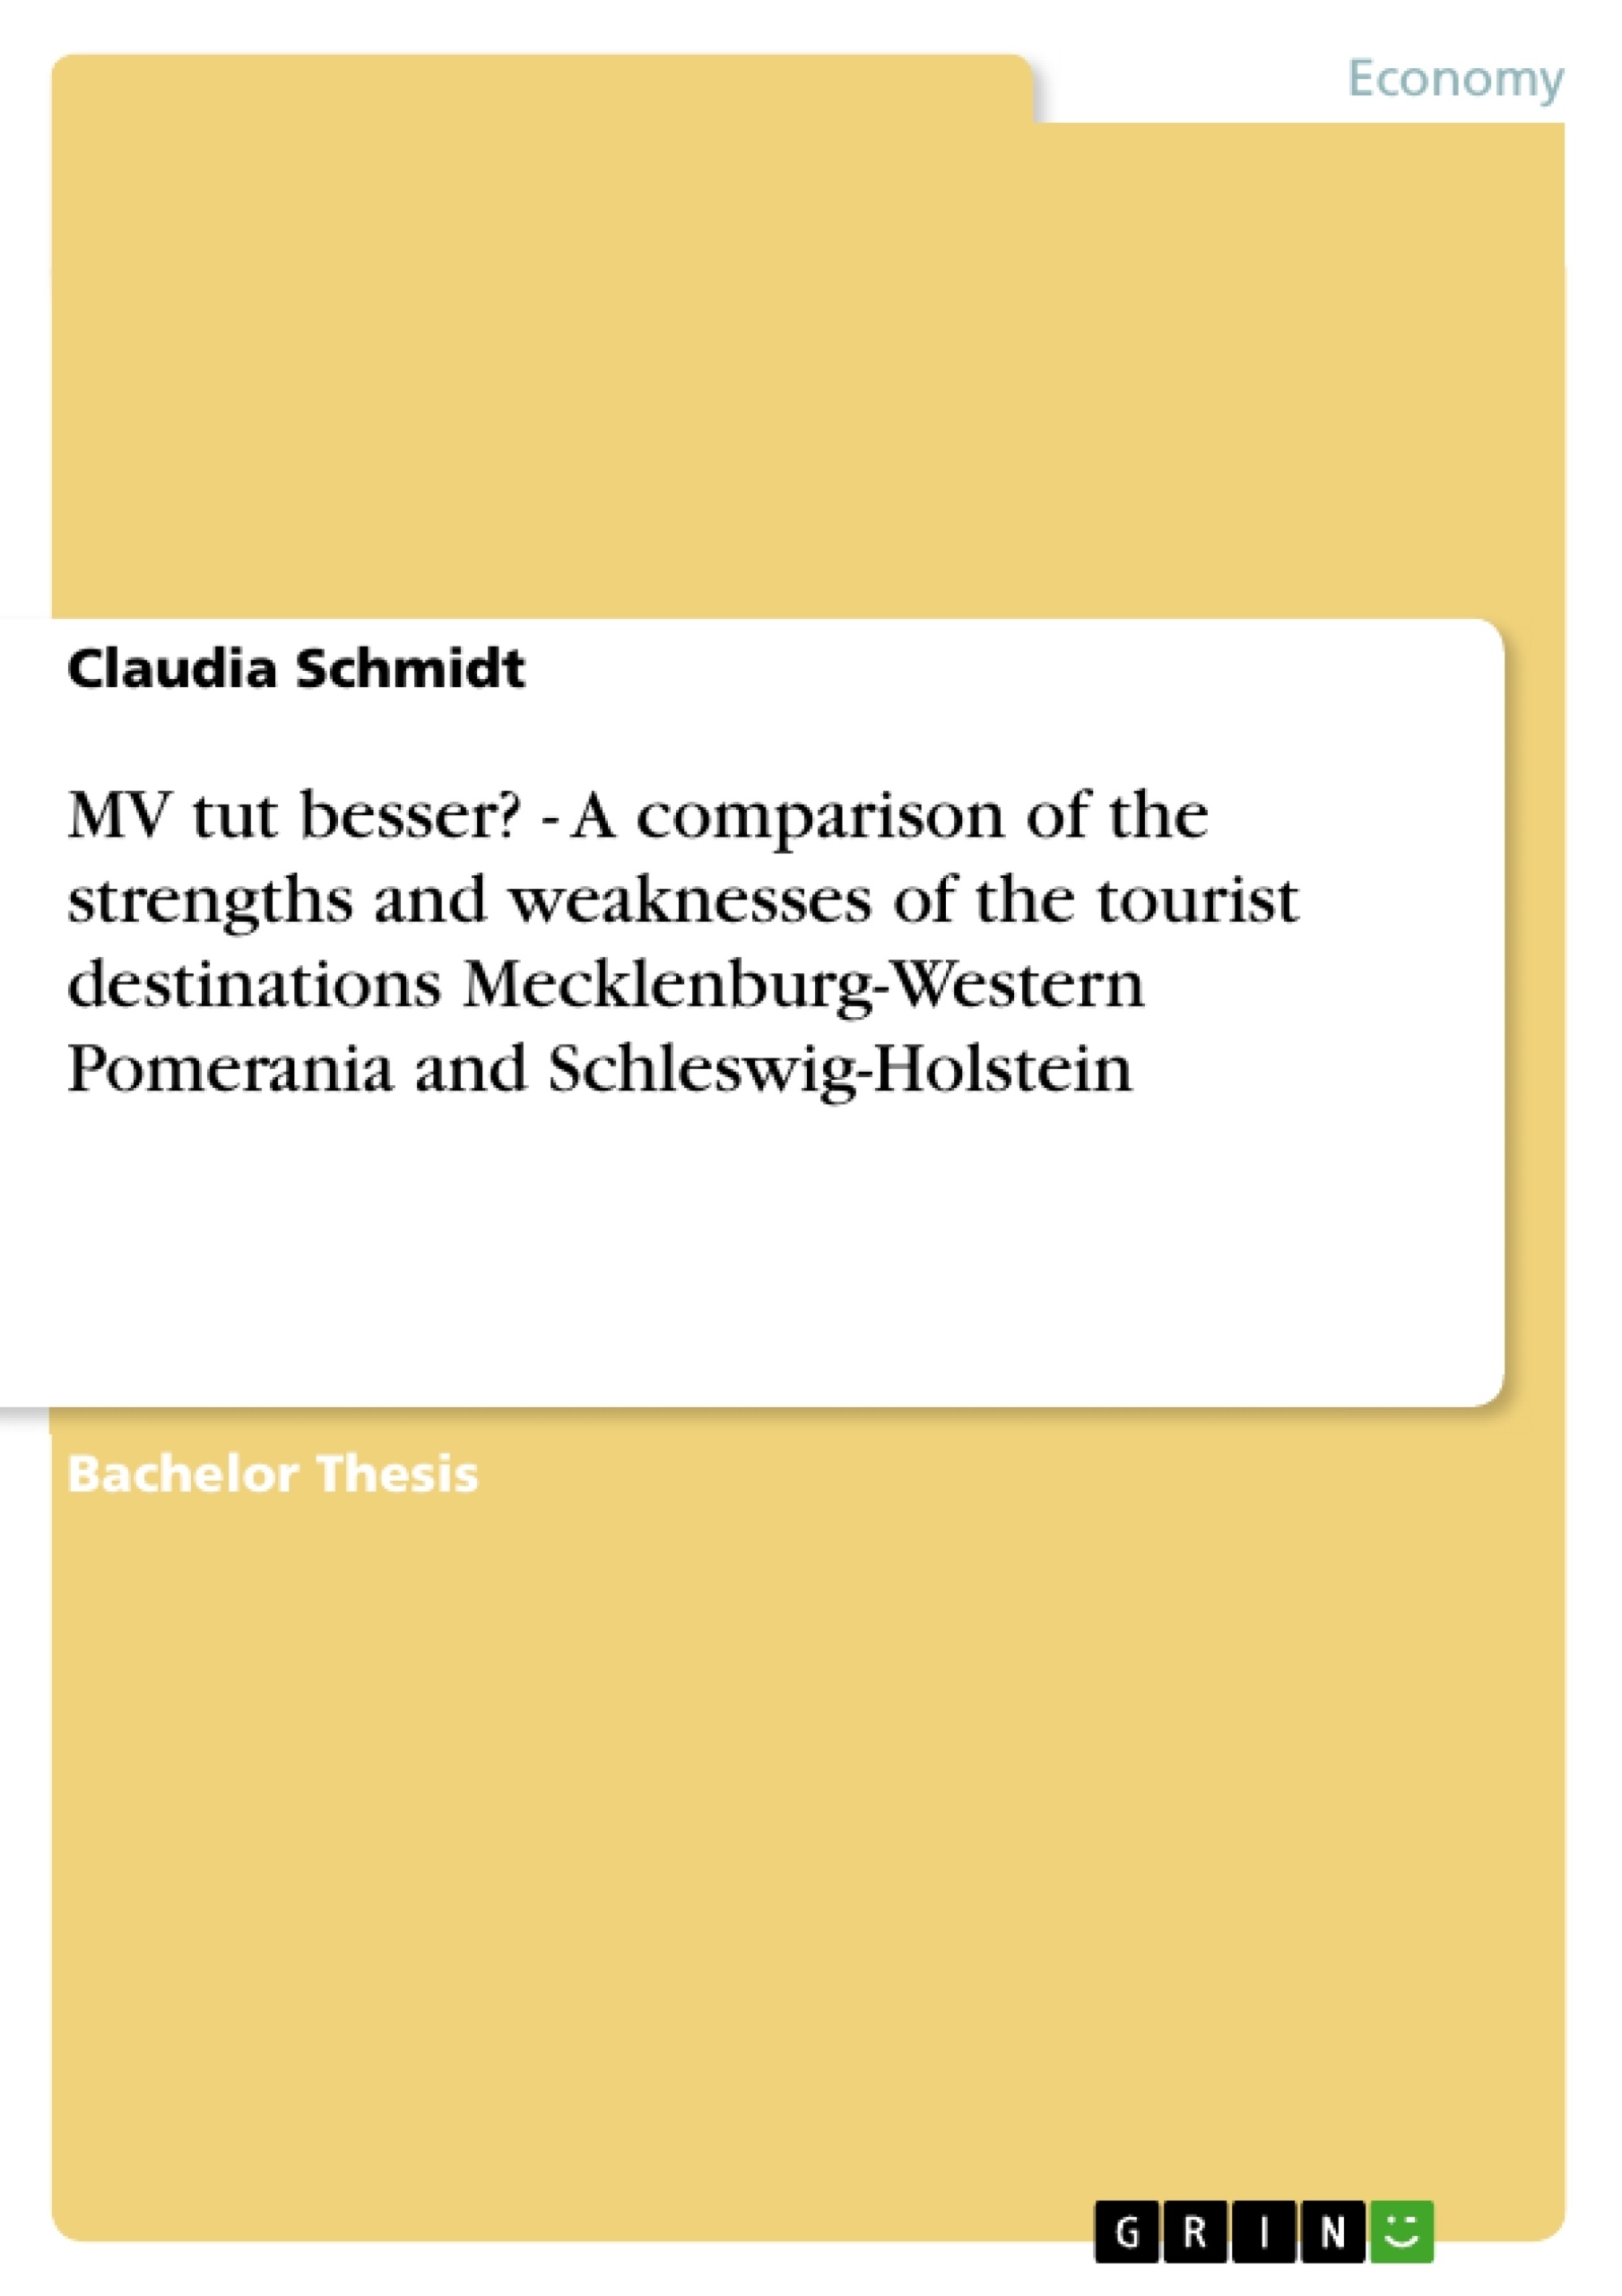 Title: MV tut besser? - A comparison of the strengths and weaknesses of the tourist destinations Mecklenburg-Western Pomerania and Schleswig-Holstein